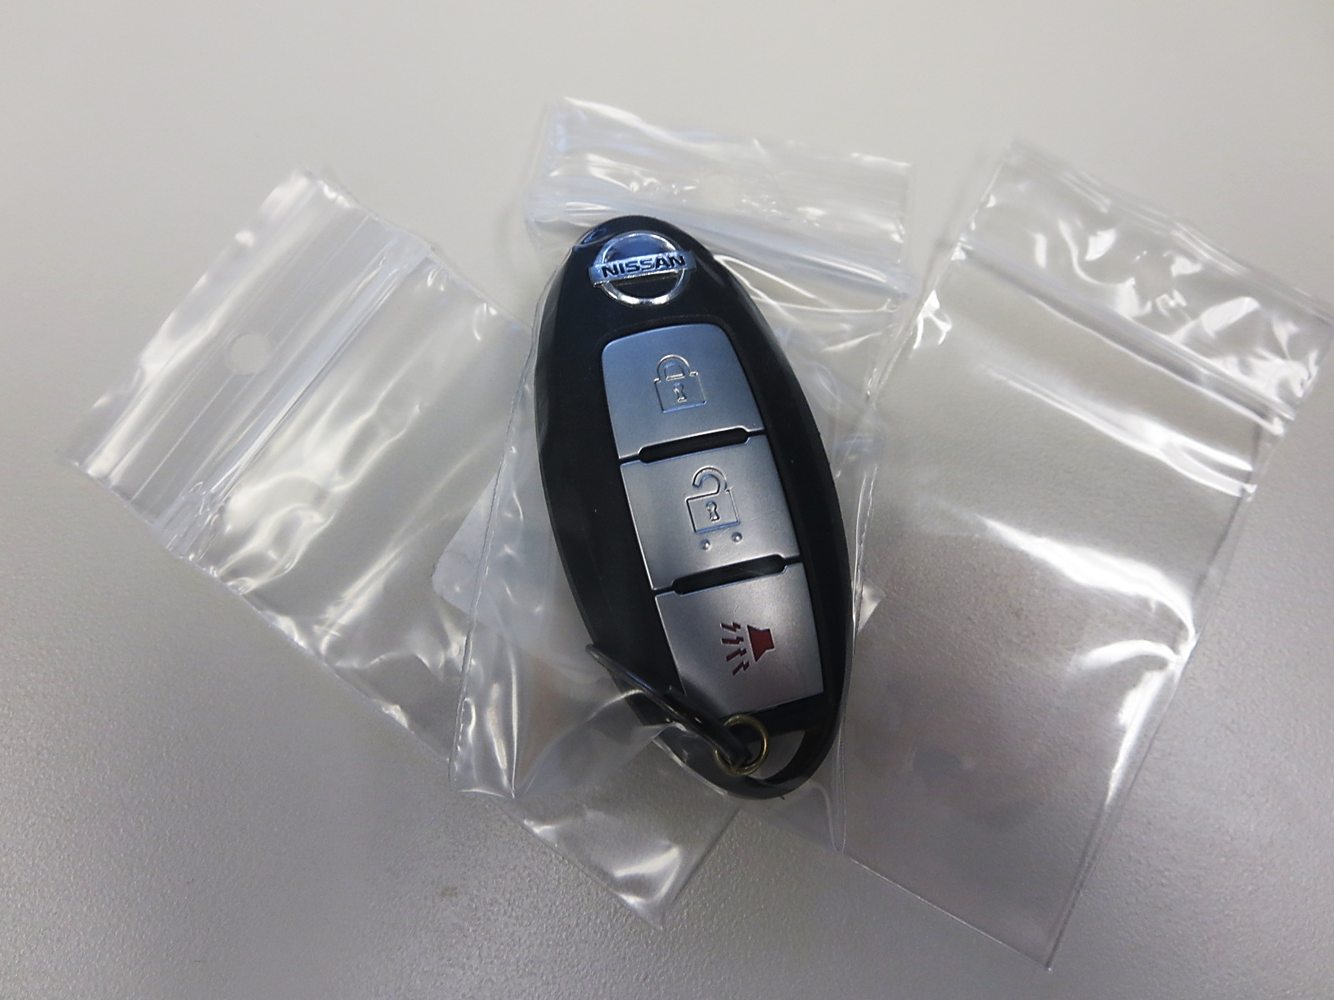  ValuBran Resealable Automotive Key Fob Sleeves - 2-1/4-in x 3-1/2-in